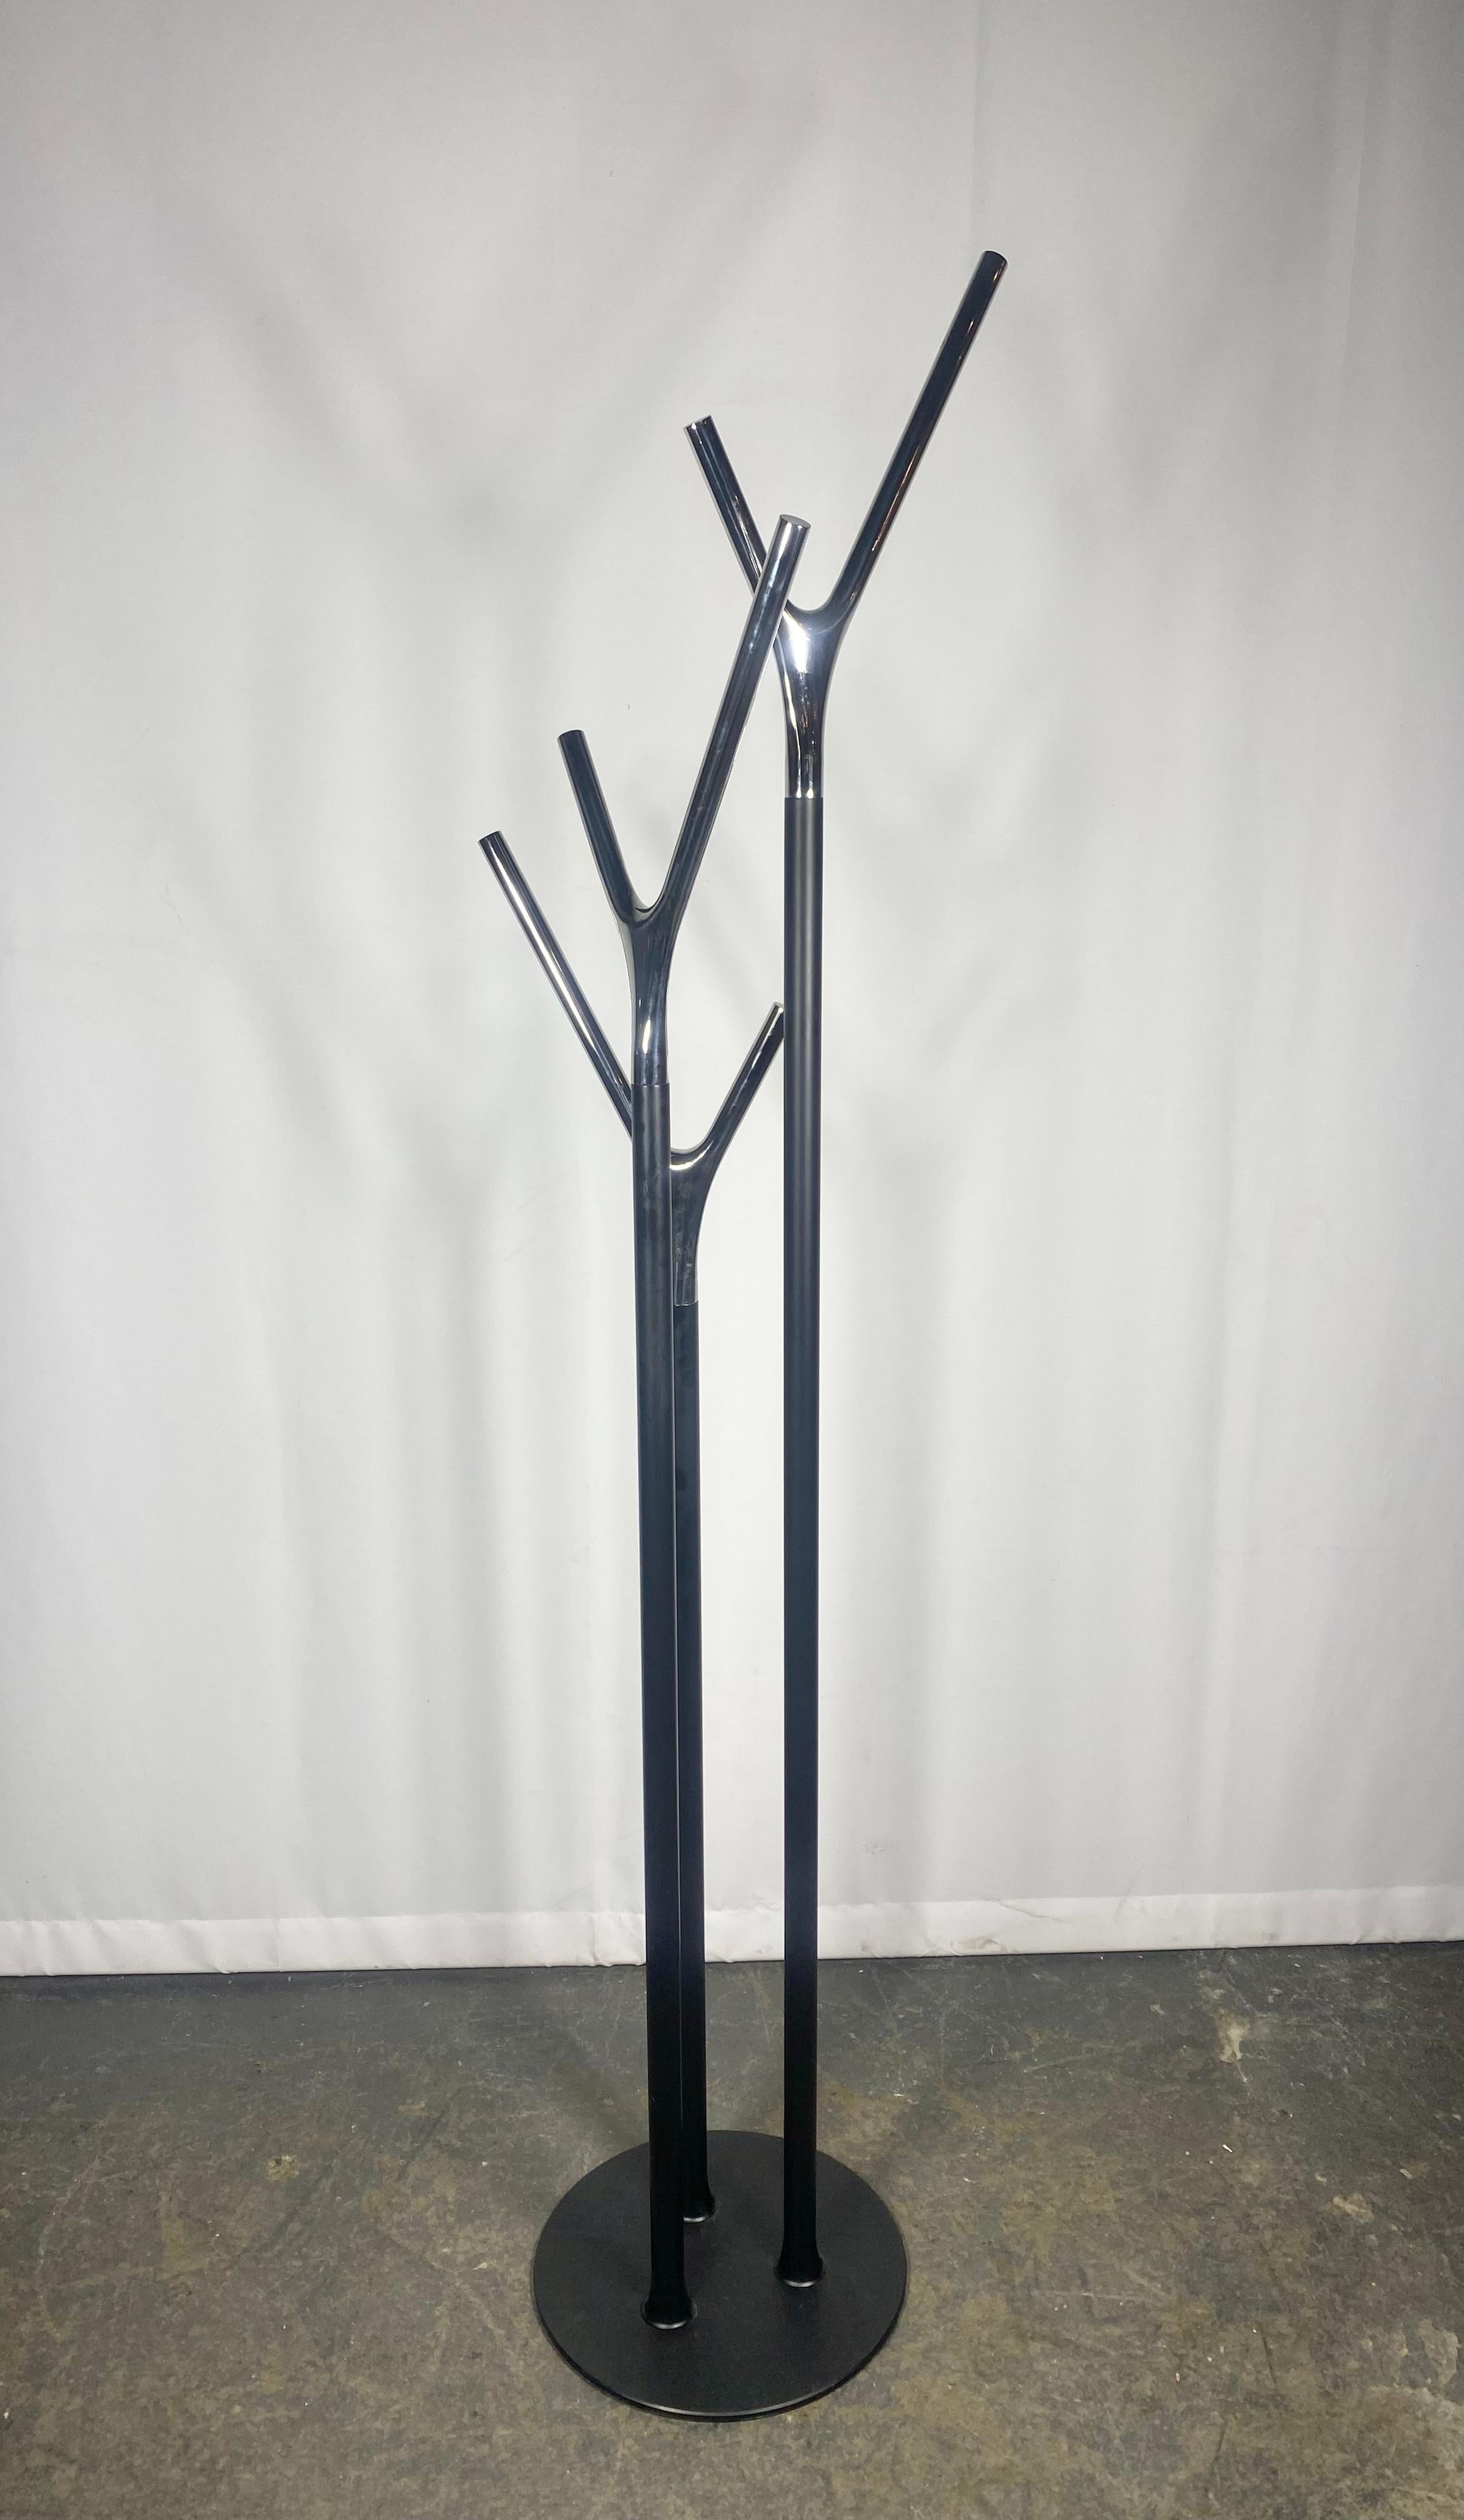 Danish Modernist Contemporary Wishbone Coat Stand - Mirror Chrome by Busk+Hertzog For Sale